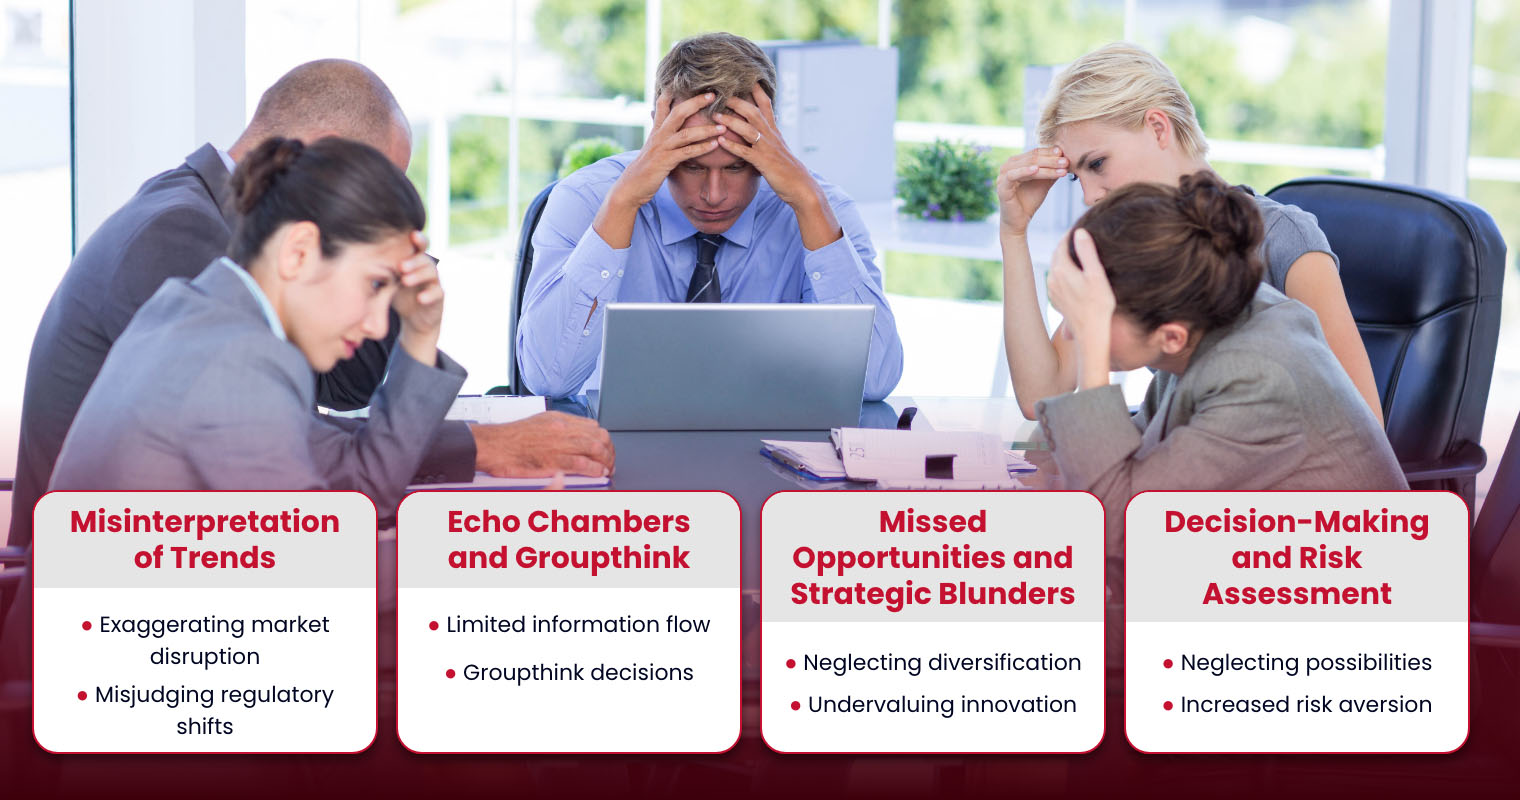 The Impacts of the Baader-Meinhof Phenomenon in the Boardroom